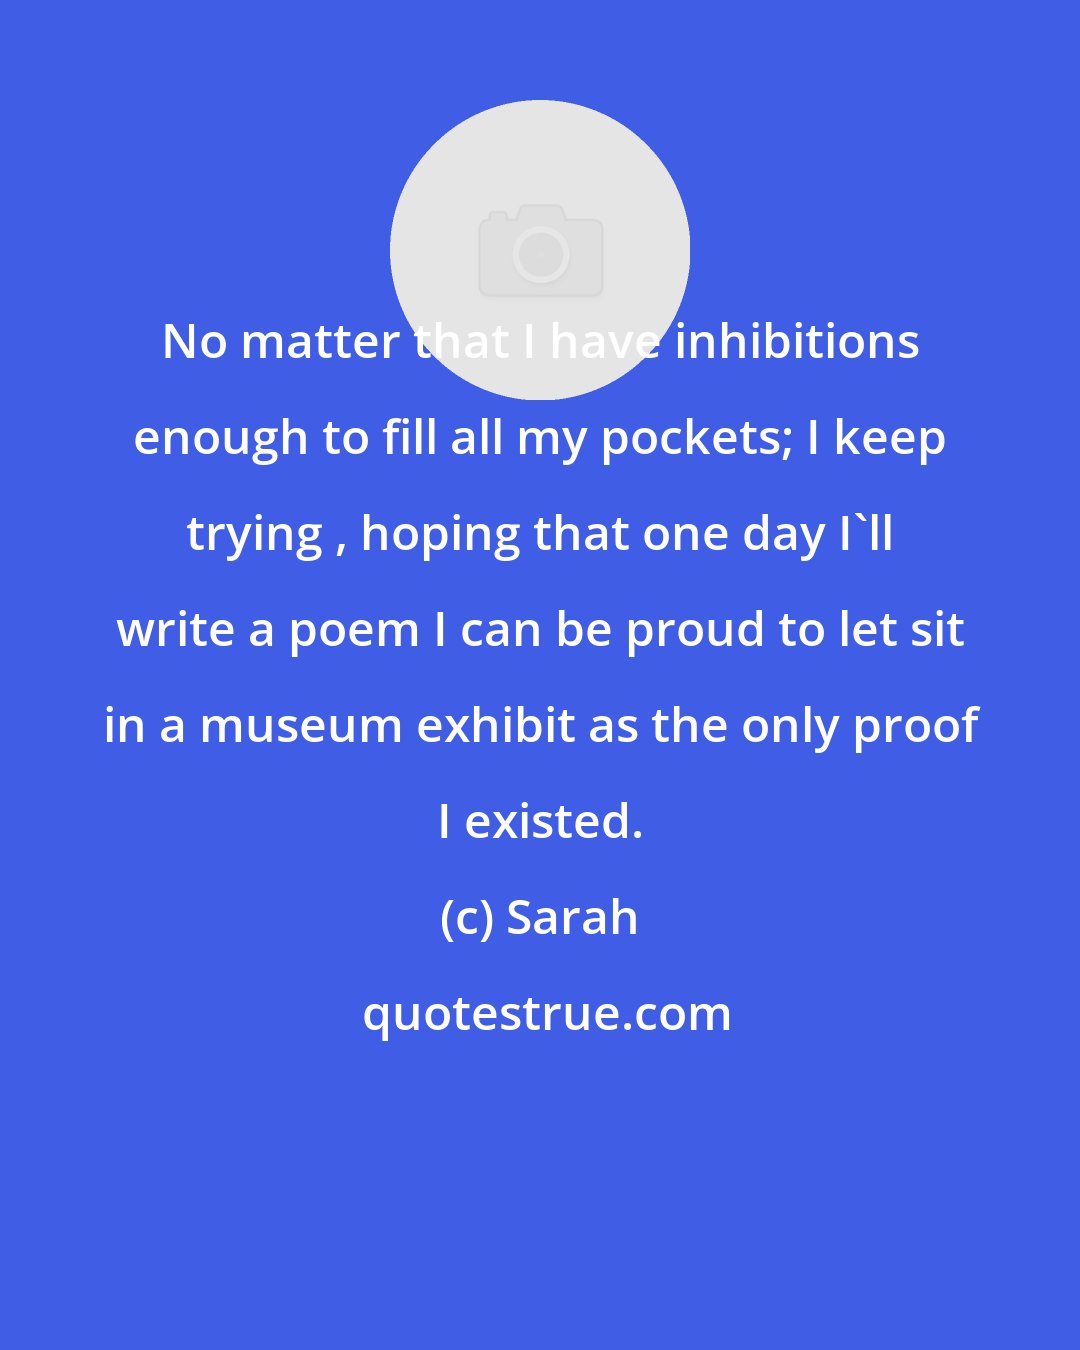 Sarah: No matter that I have inhibitions enough to fill all my pockets; I keep trying , hoping that one day I'll write a poem I can be proud to let sit in a museum exhibit as the only proof I existed.